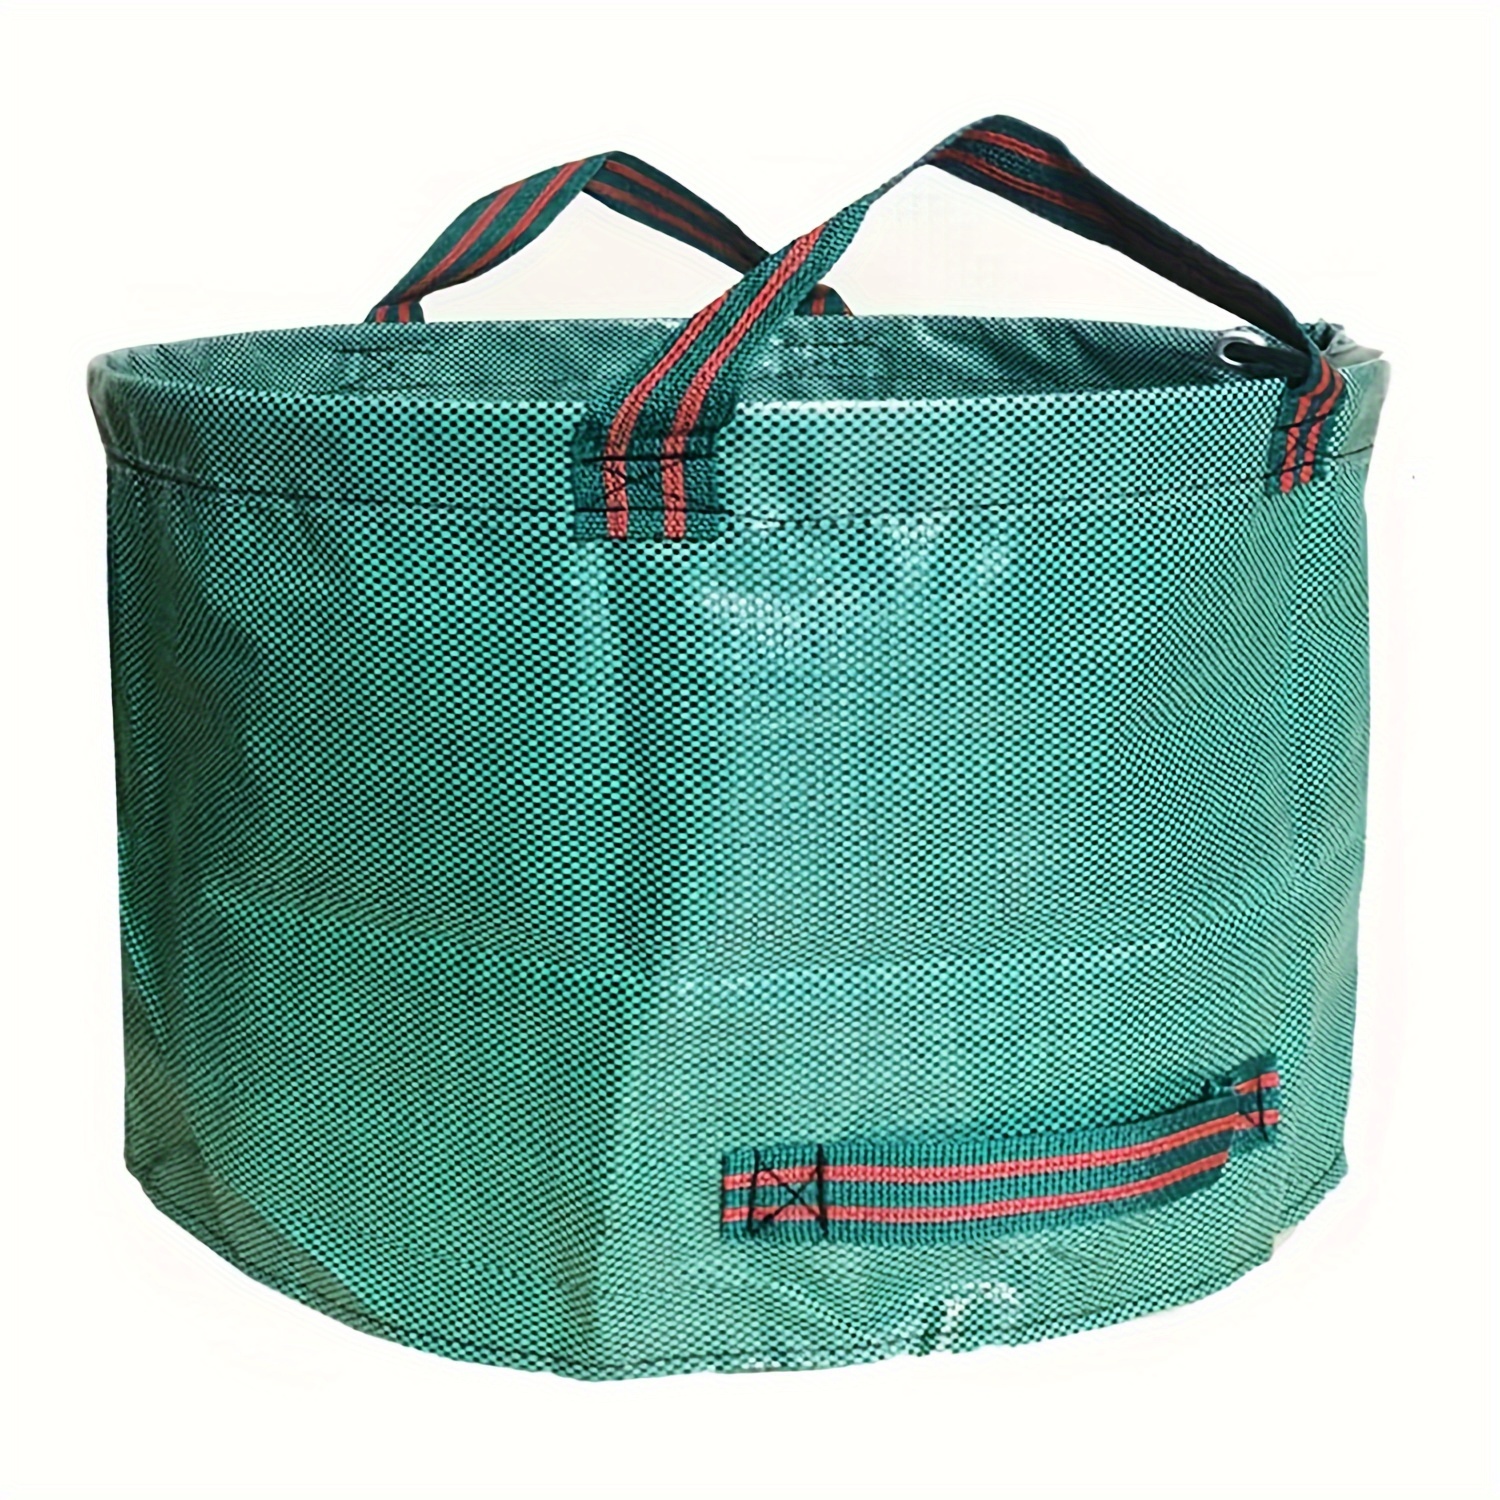 

16-gallon Pp Home Garden Bag With Handles, Reusable Yard Waste Leaf Trash Can, Patio Bag, Lawn Garbage Container, Durable Laundry Storage With Zipper Pocket